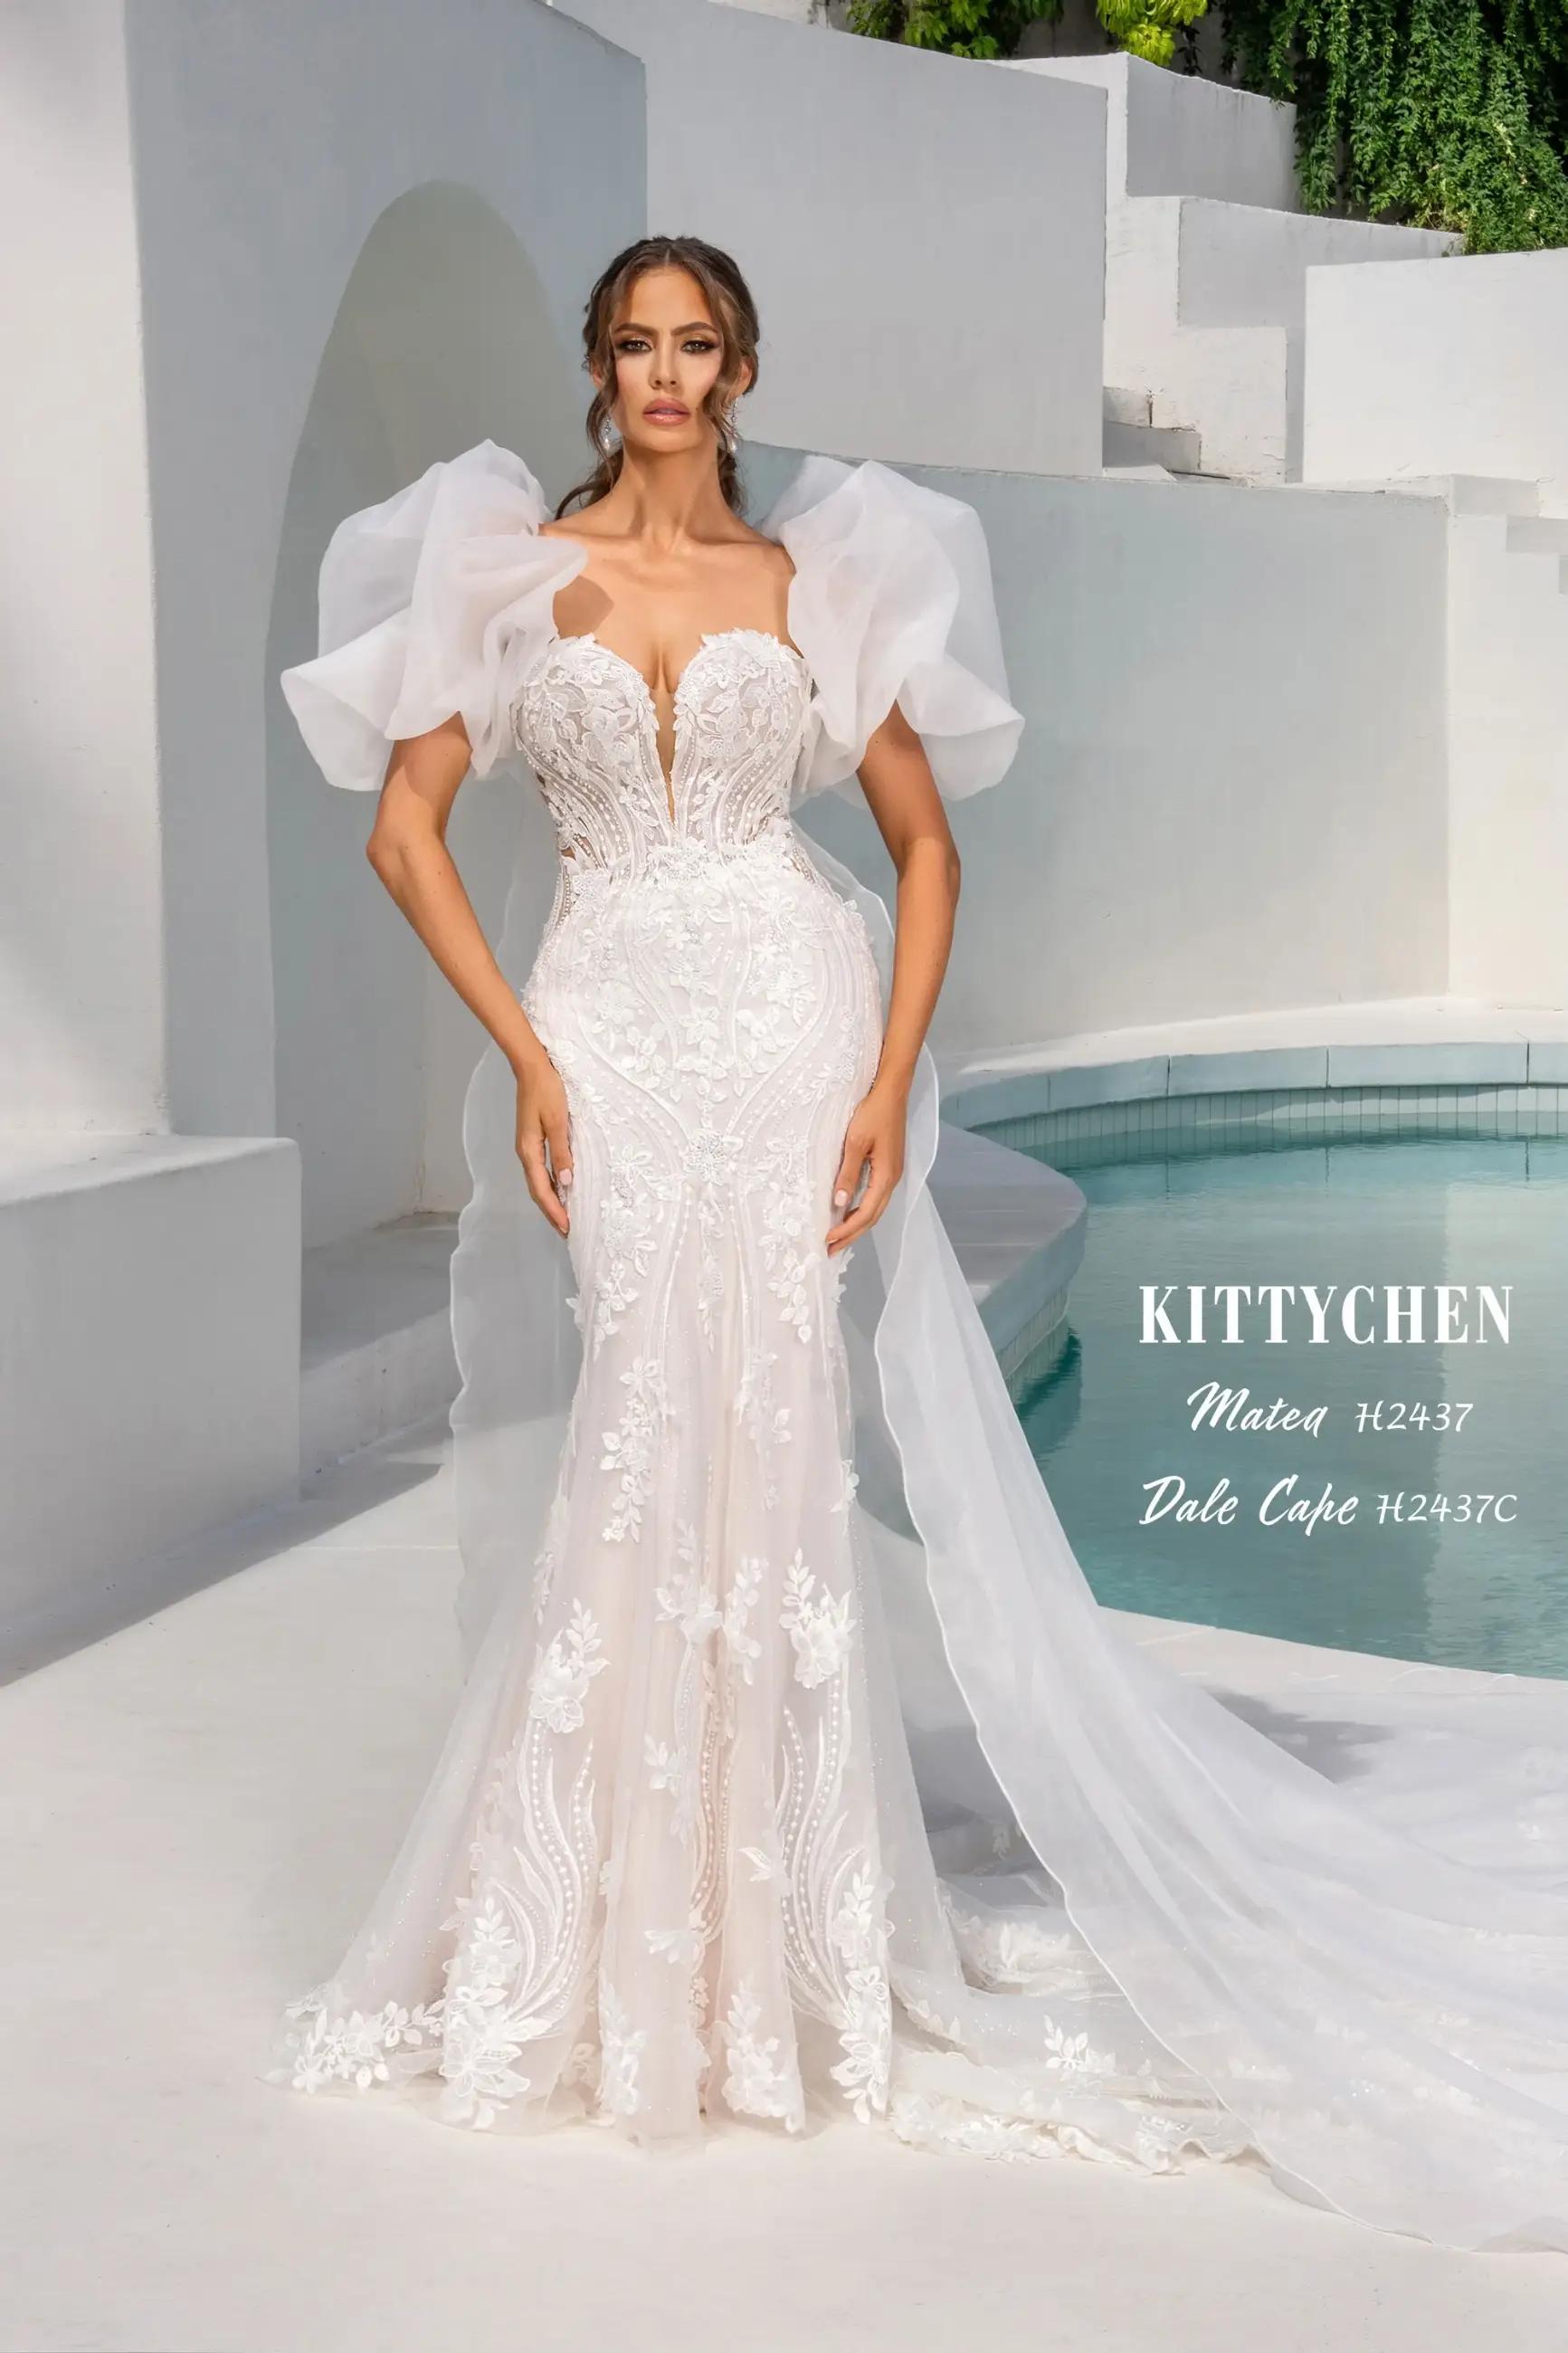 How to Choose the Best Wedding Dress for Your Body Type? Image